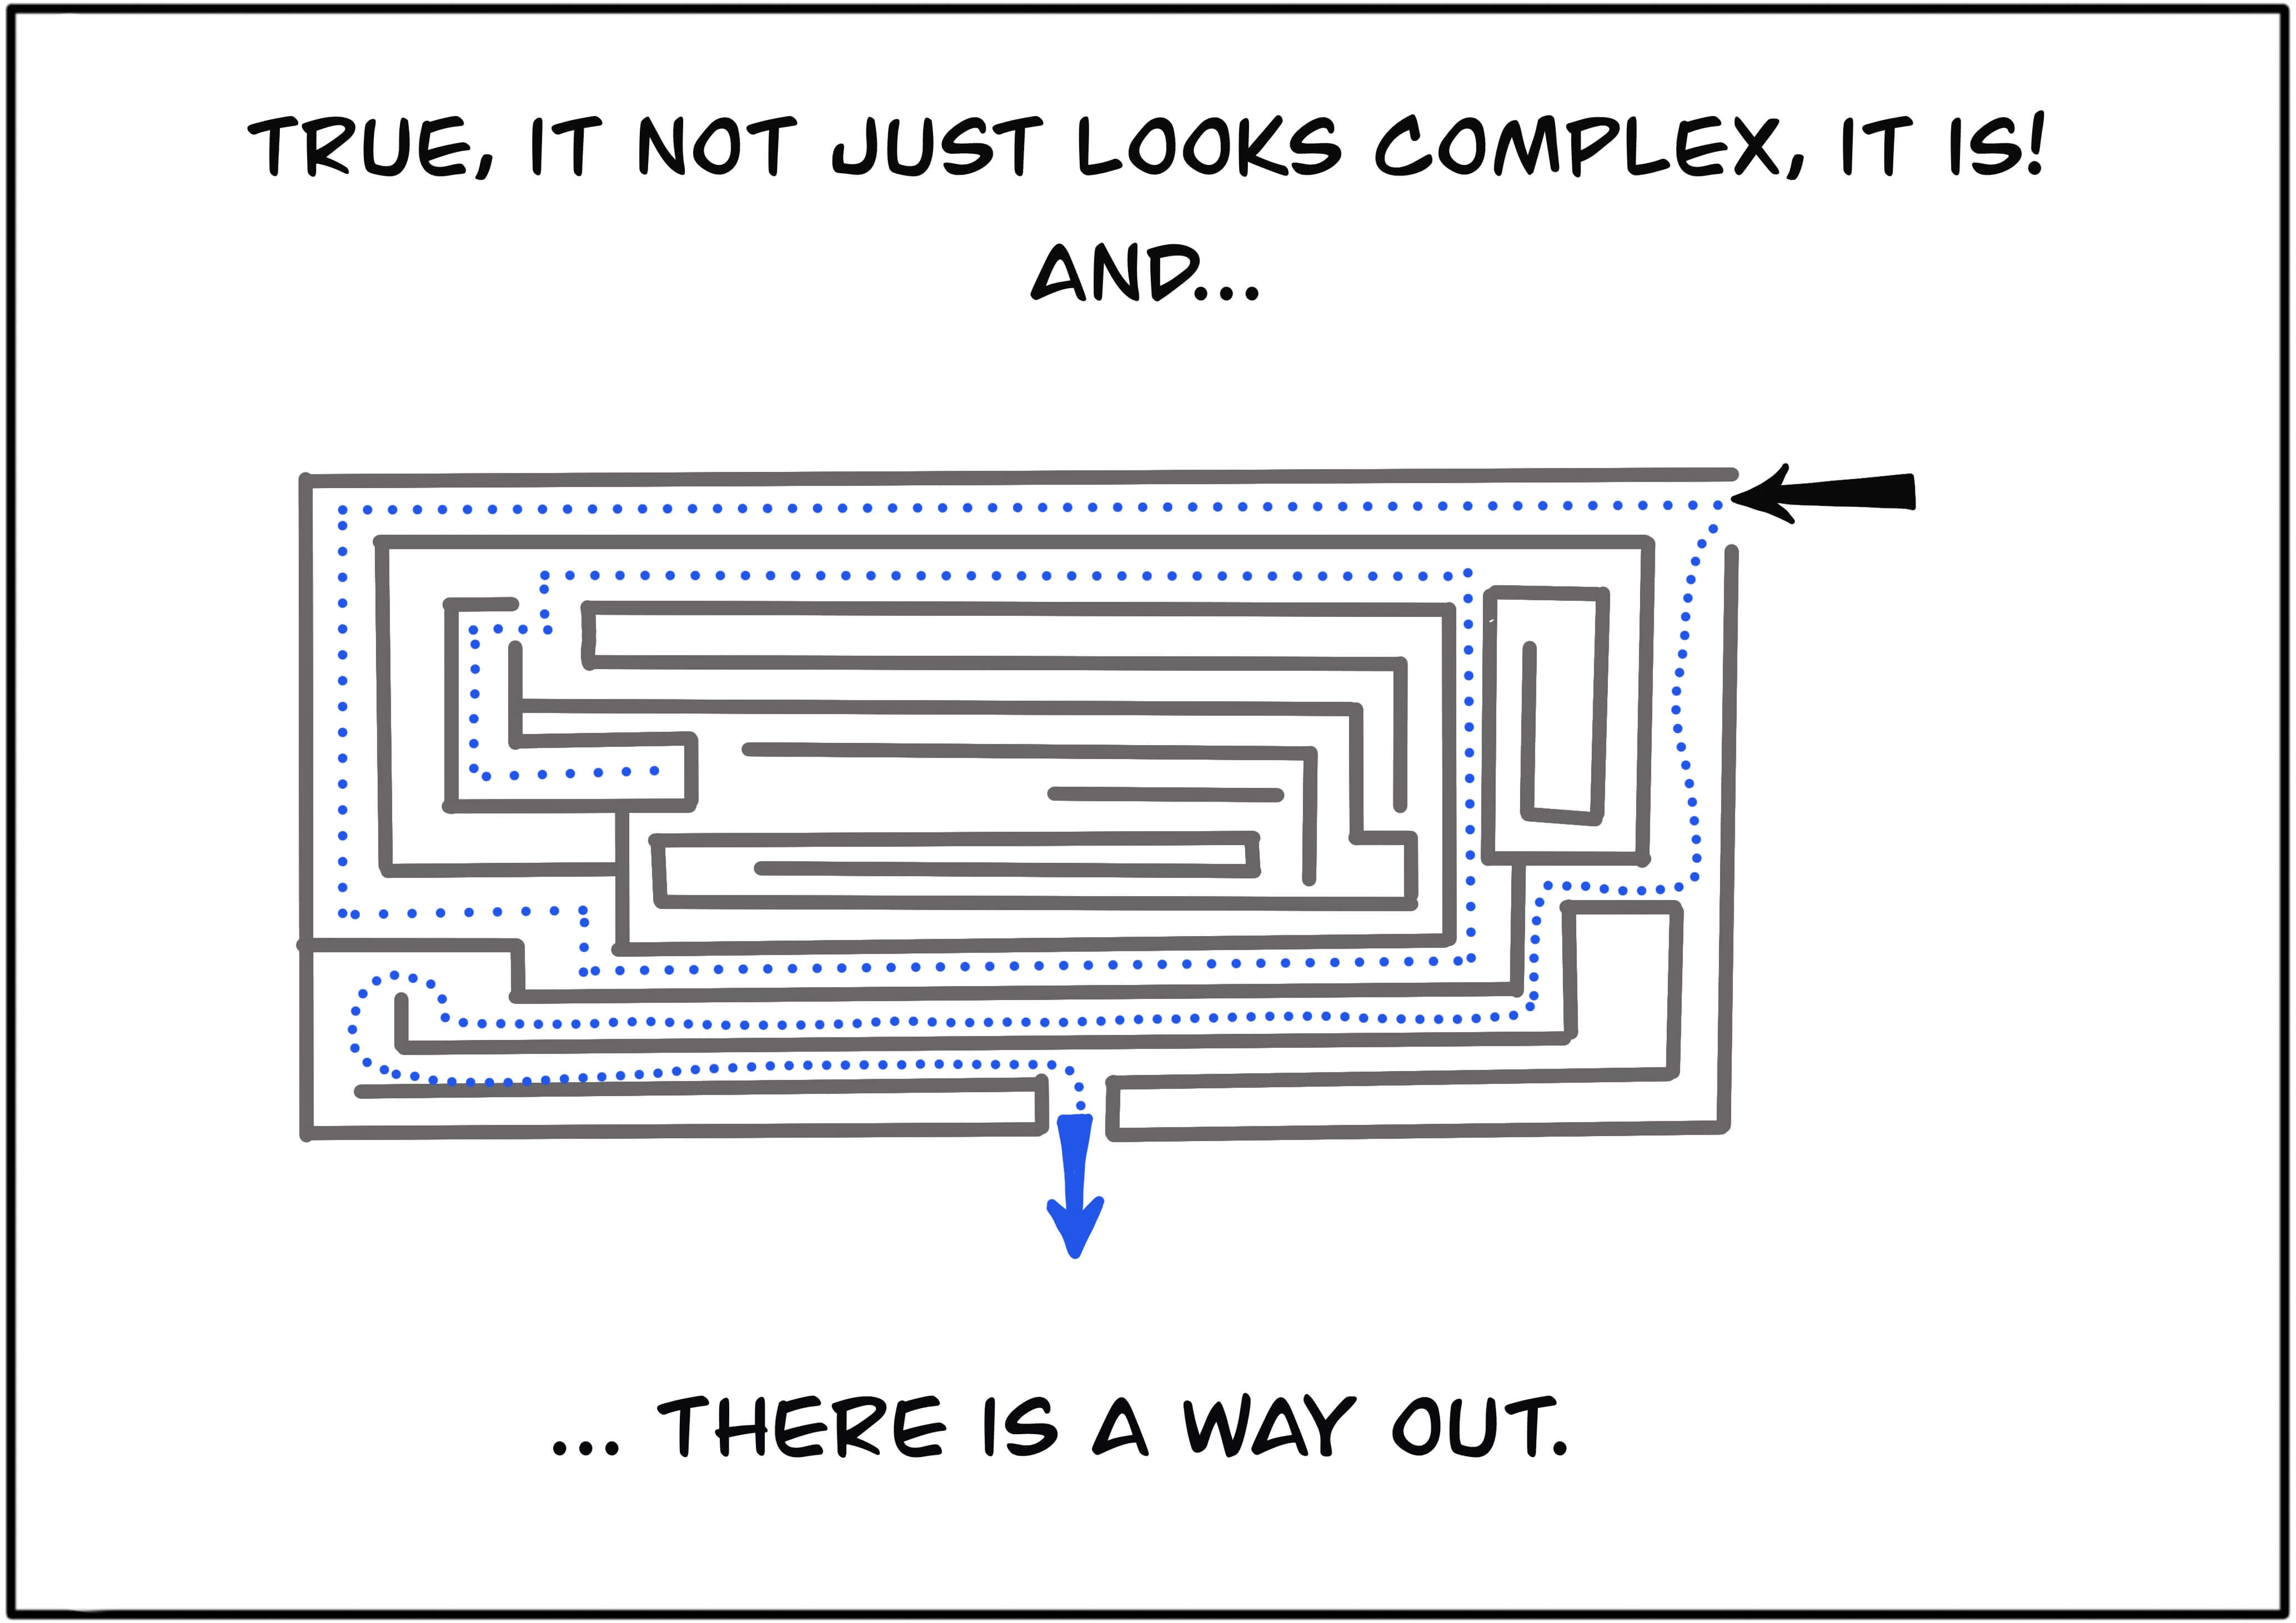 It not just looks complex, it is! There is a way out.